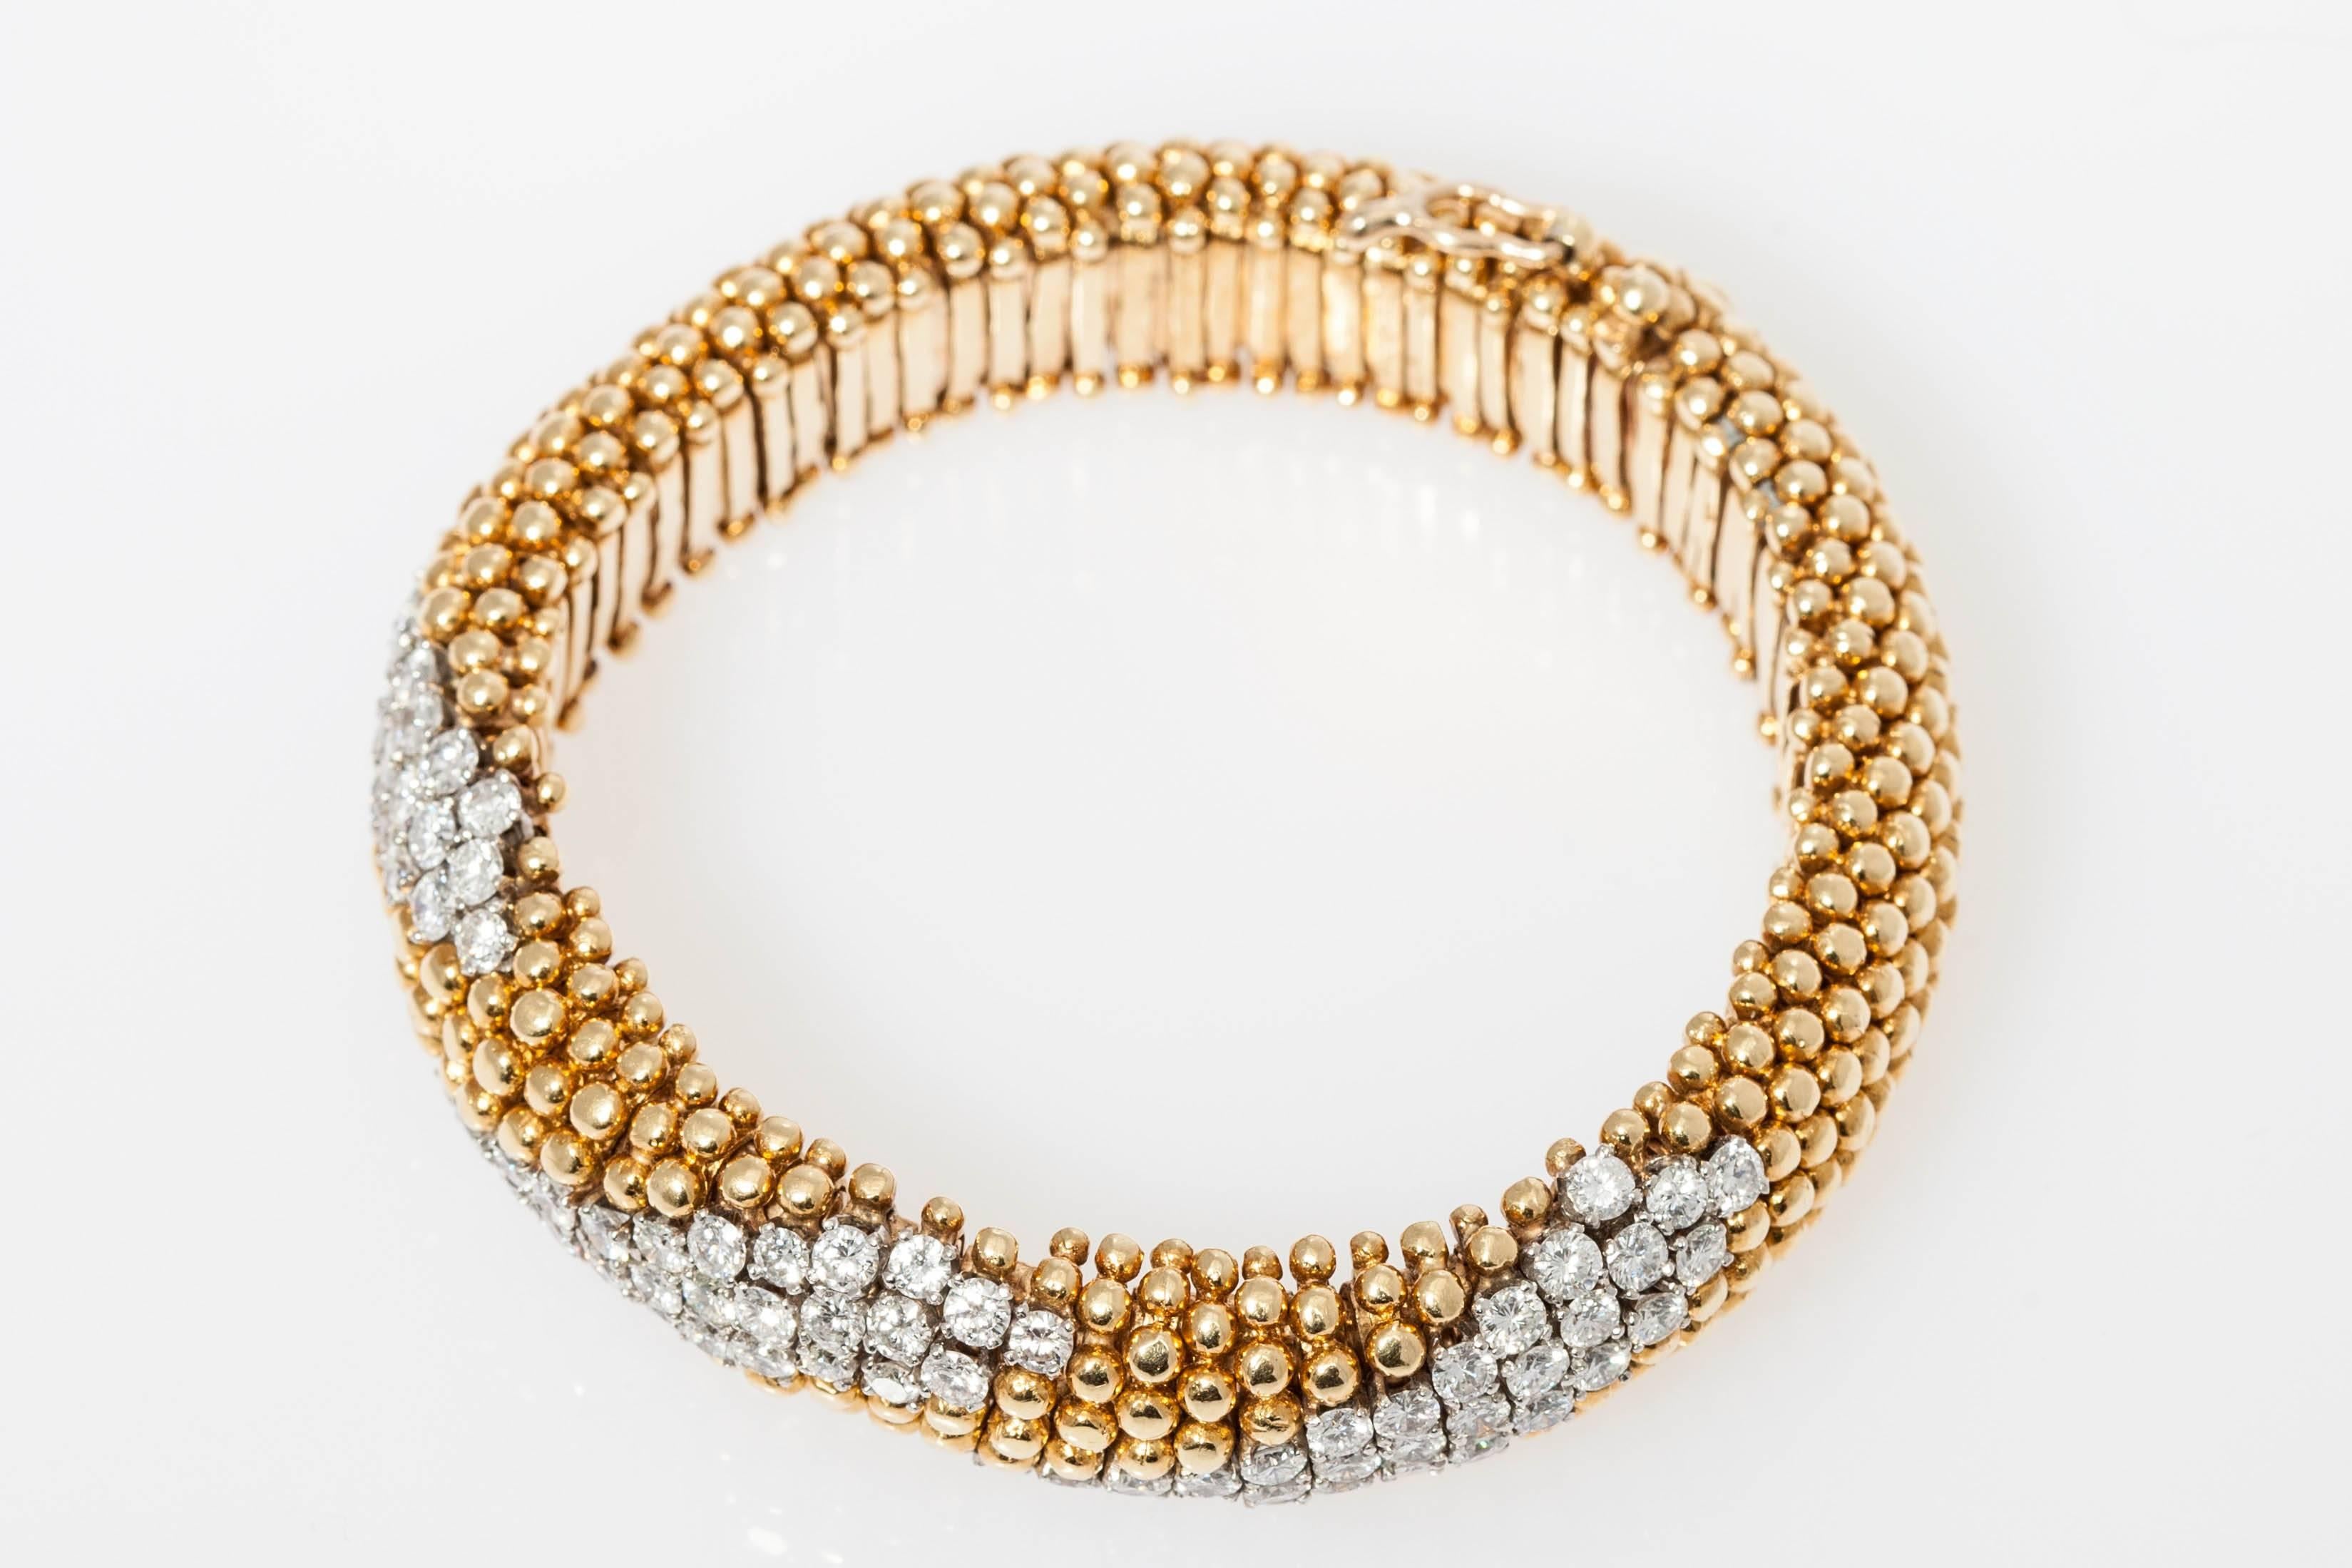 A chic pair of cous-cous design 18kt yellow gold and fine quality brilliant diamonds bracelets. Circa 1970. Diamond weight: Approximately 20cts total (10cts each). 

